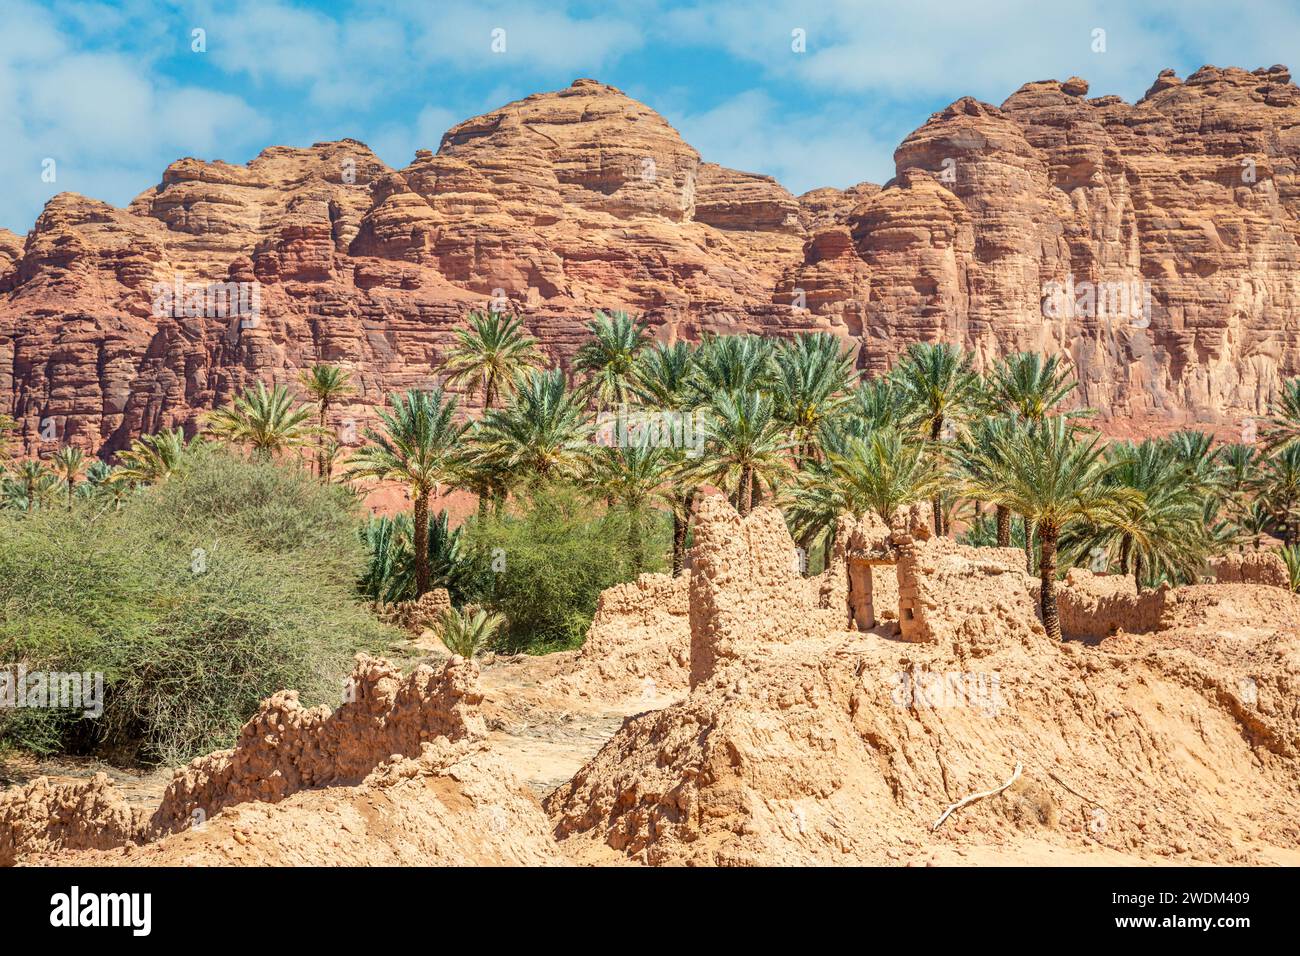 Al Ula ruined old town streets with palms along the road, Saudi Arabia Stock Photo